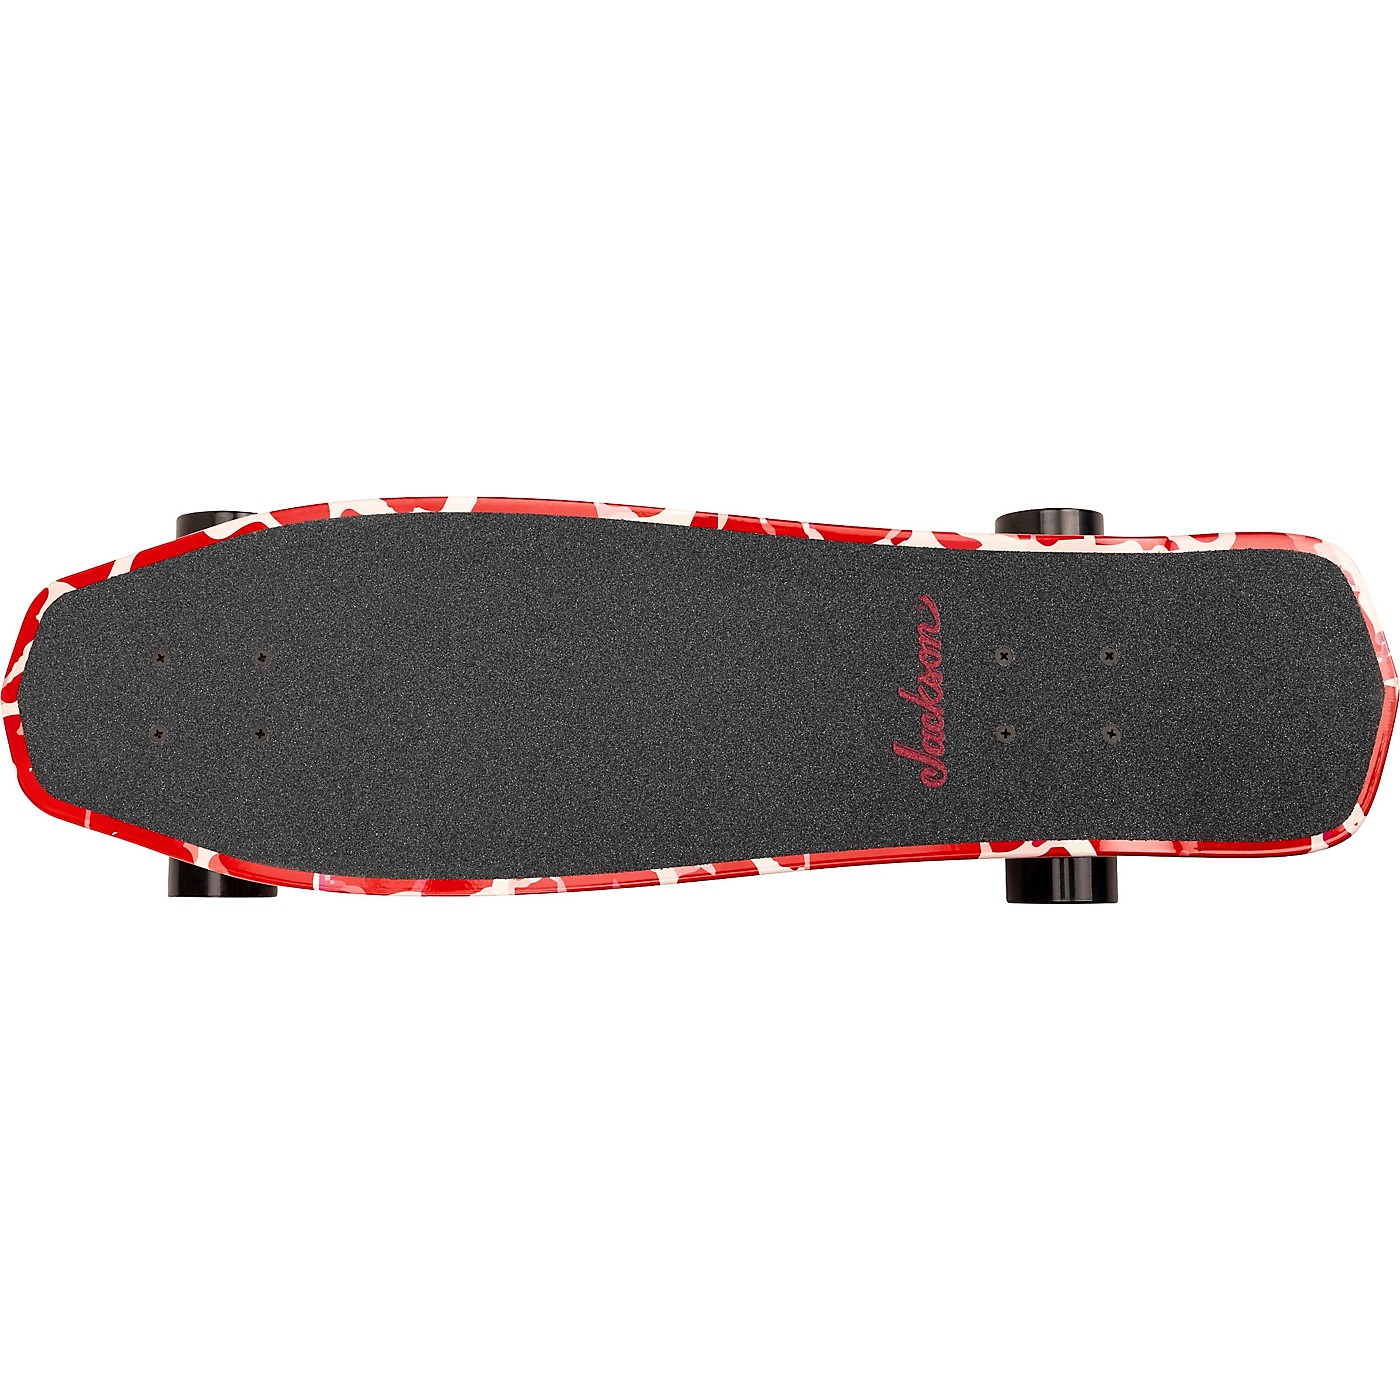 Jackson Red and White Crackle Skateboard thumbnail